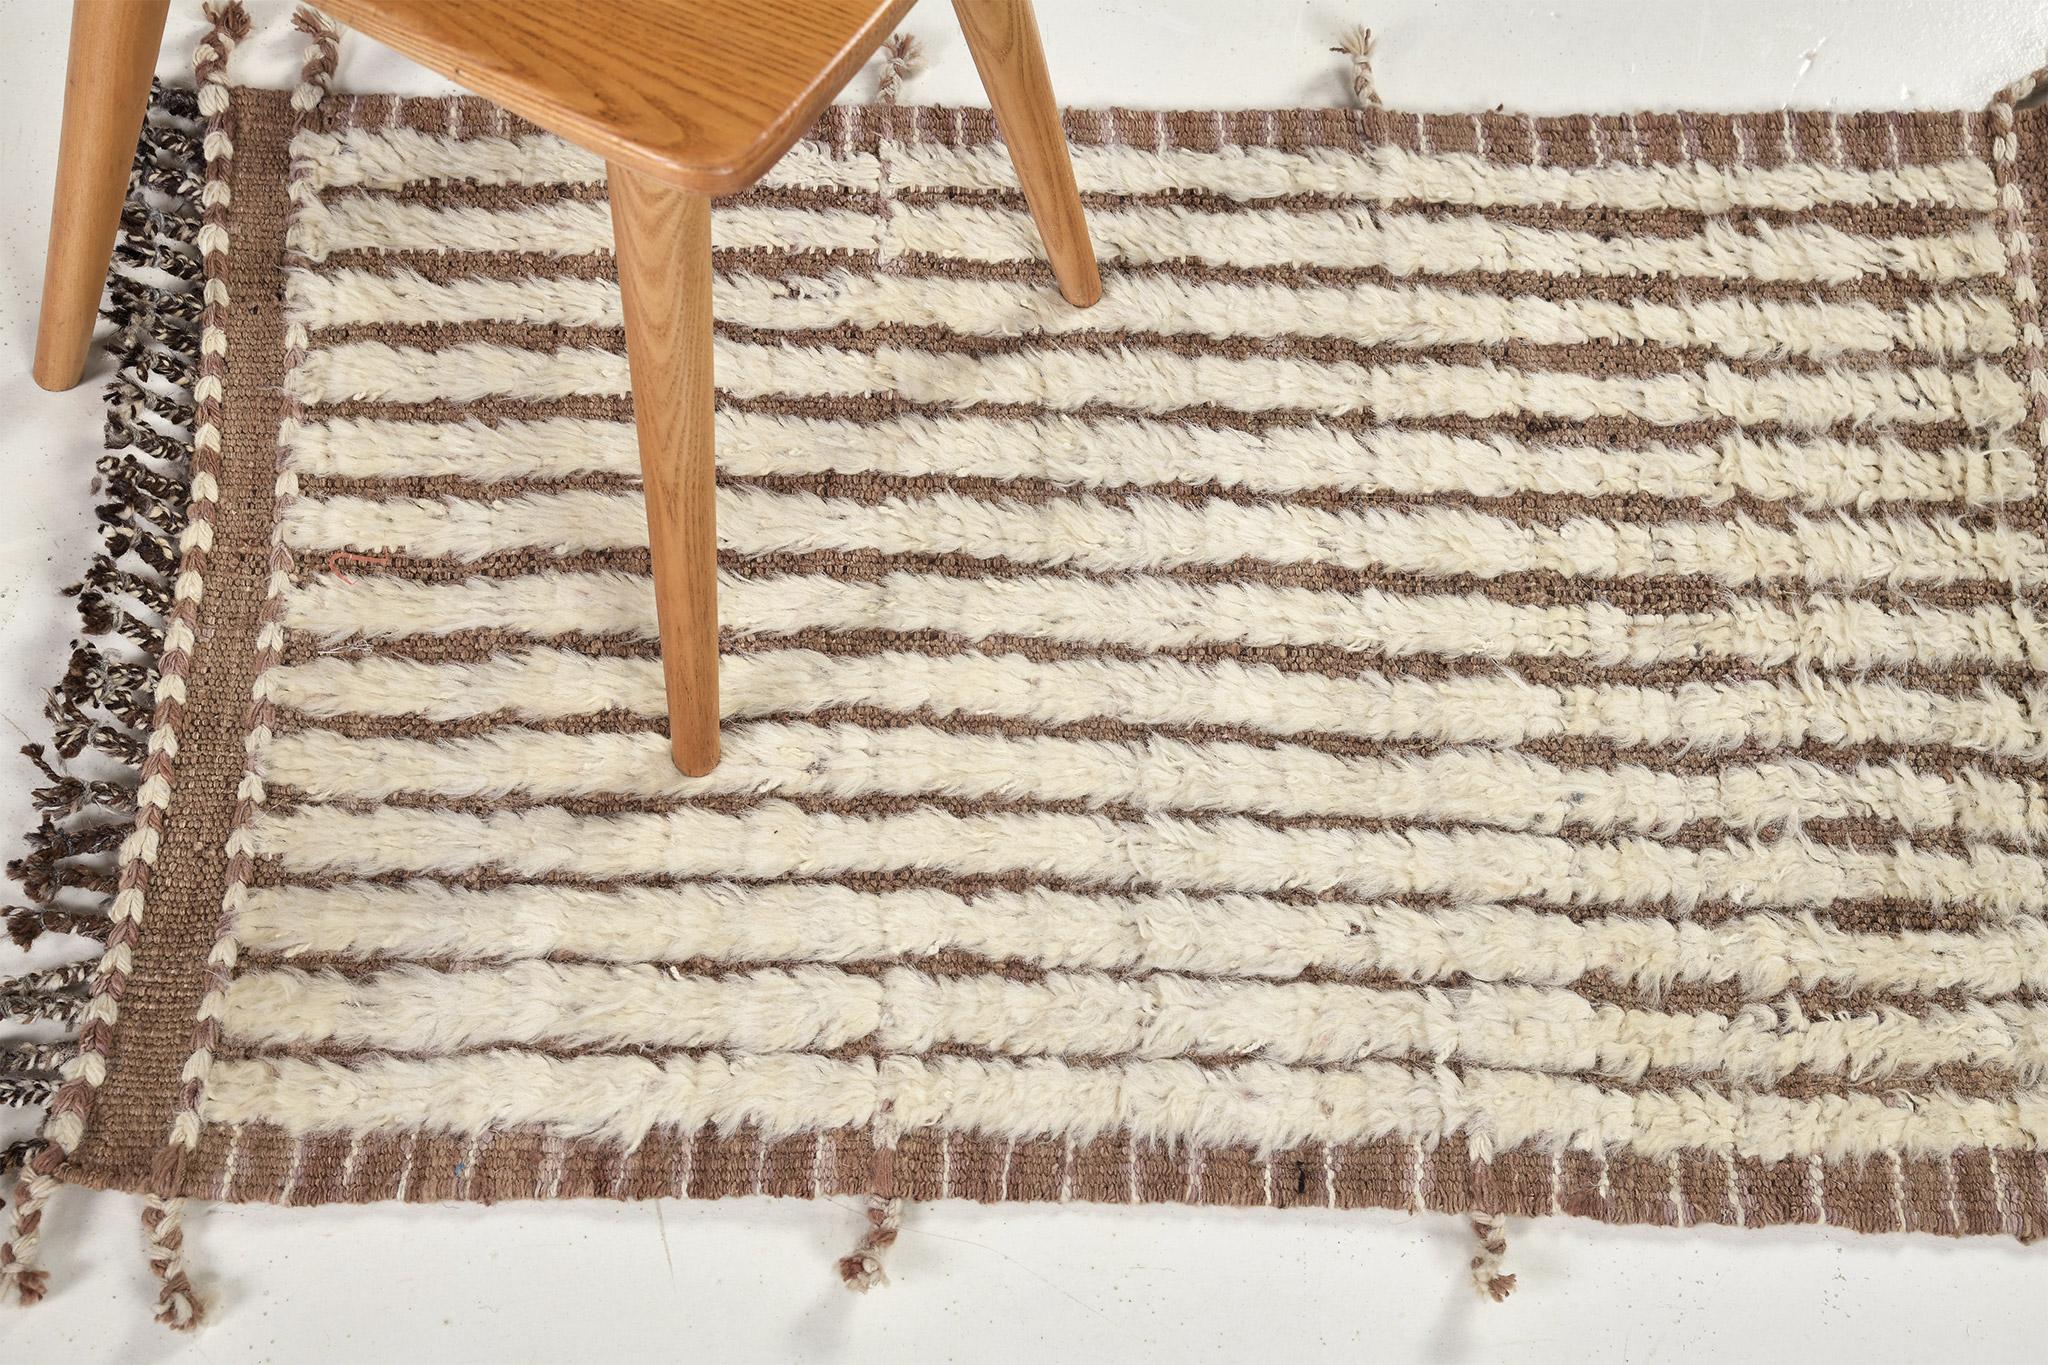 Fohn' is a handwoven luxurious wool rug with dainty embossed line detailing. In addition to its caramel toned flat-weave, Fohn has a perfect shag that brings a radiant and contemporary feel to one's space. The Haute Bohemian collection is designed